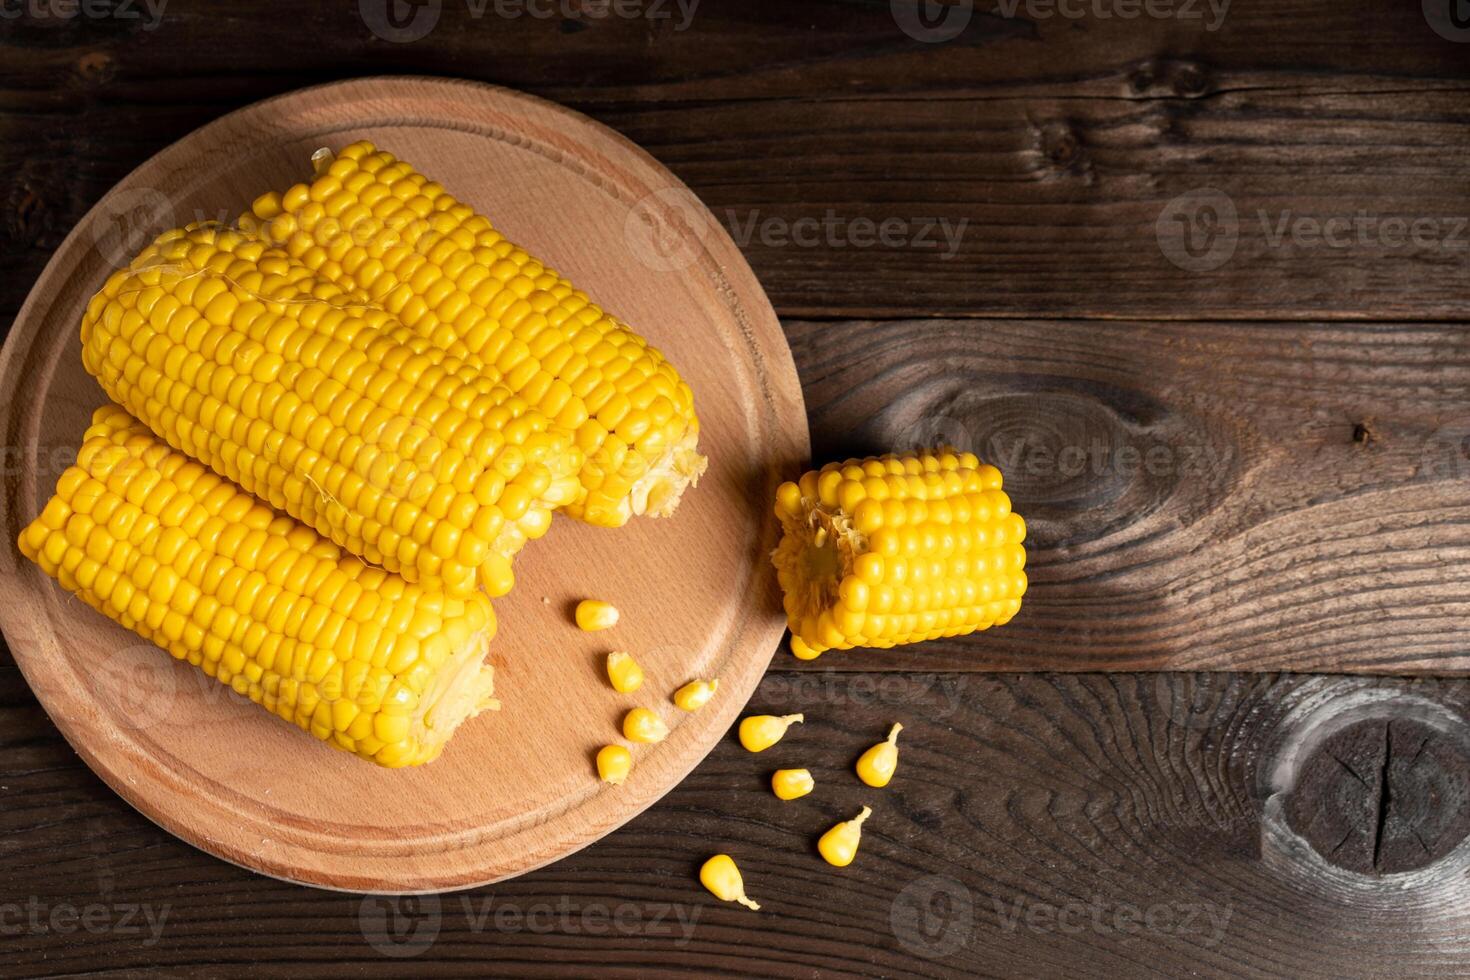 Corn cob with lies on cutting board wooden table background. photo